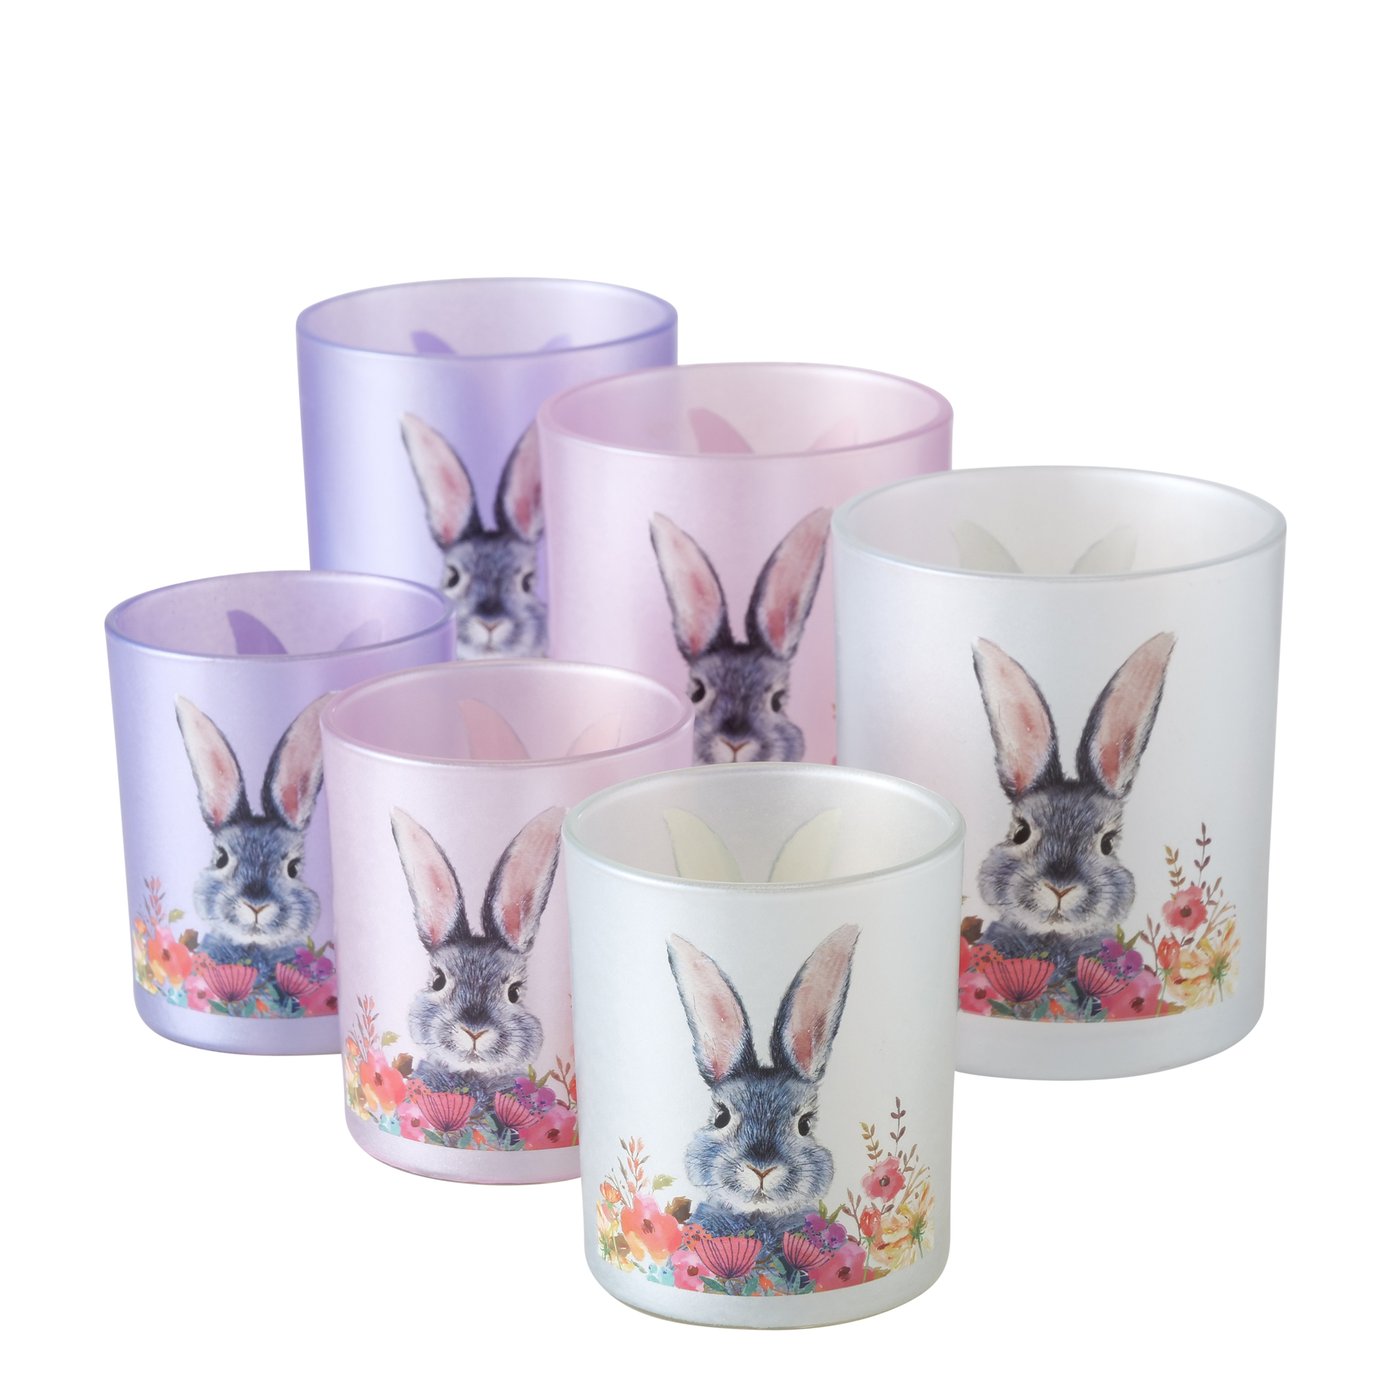 &Quirky Puschel Rabbit Tealight Holders : Set of 2 - White, Pink or Purple